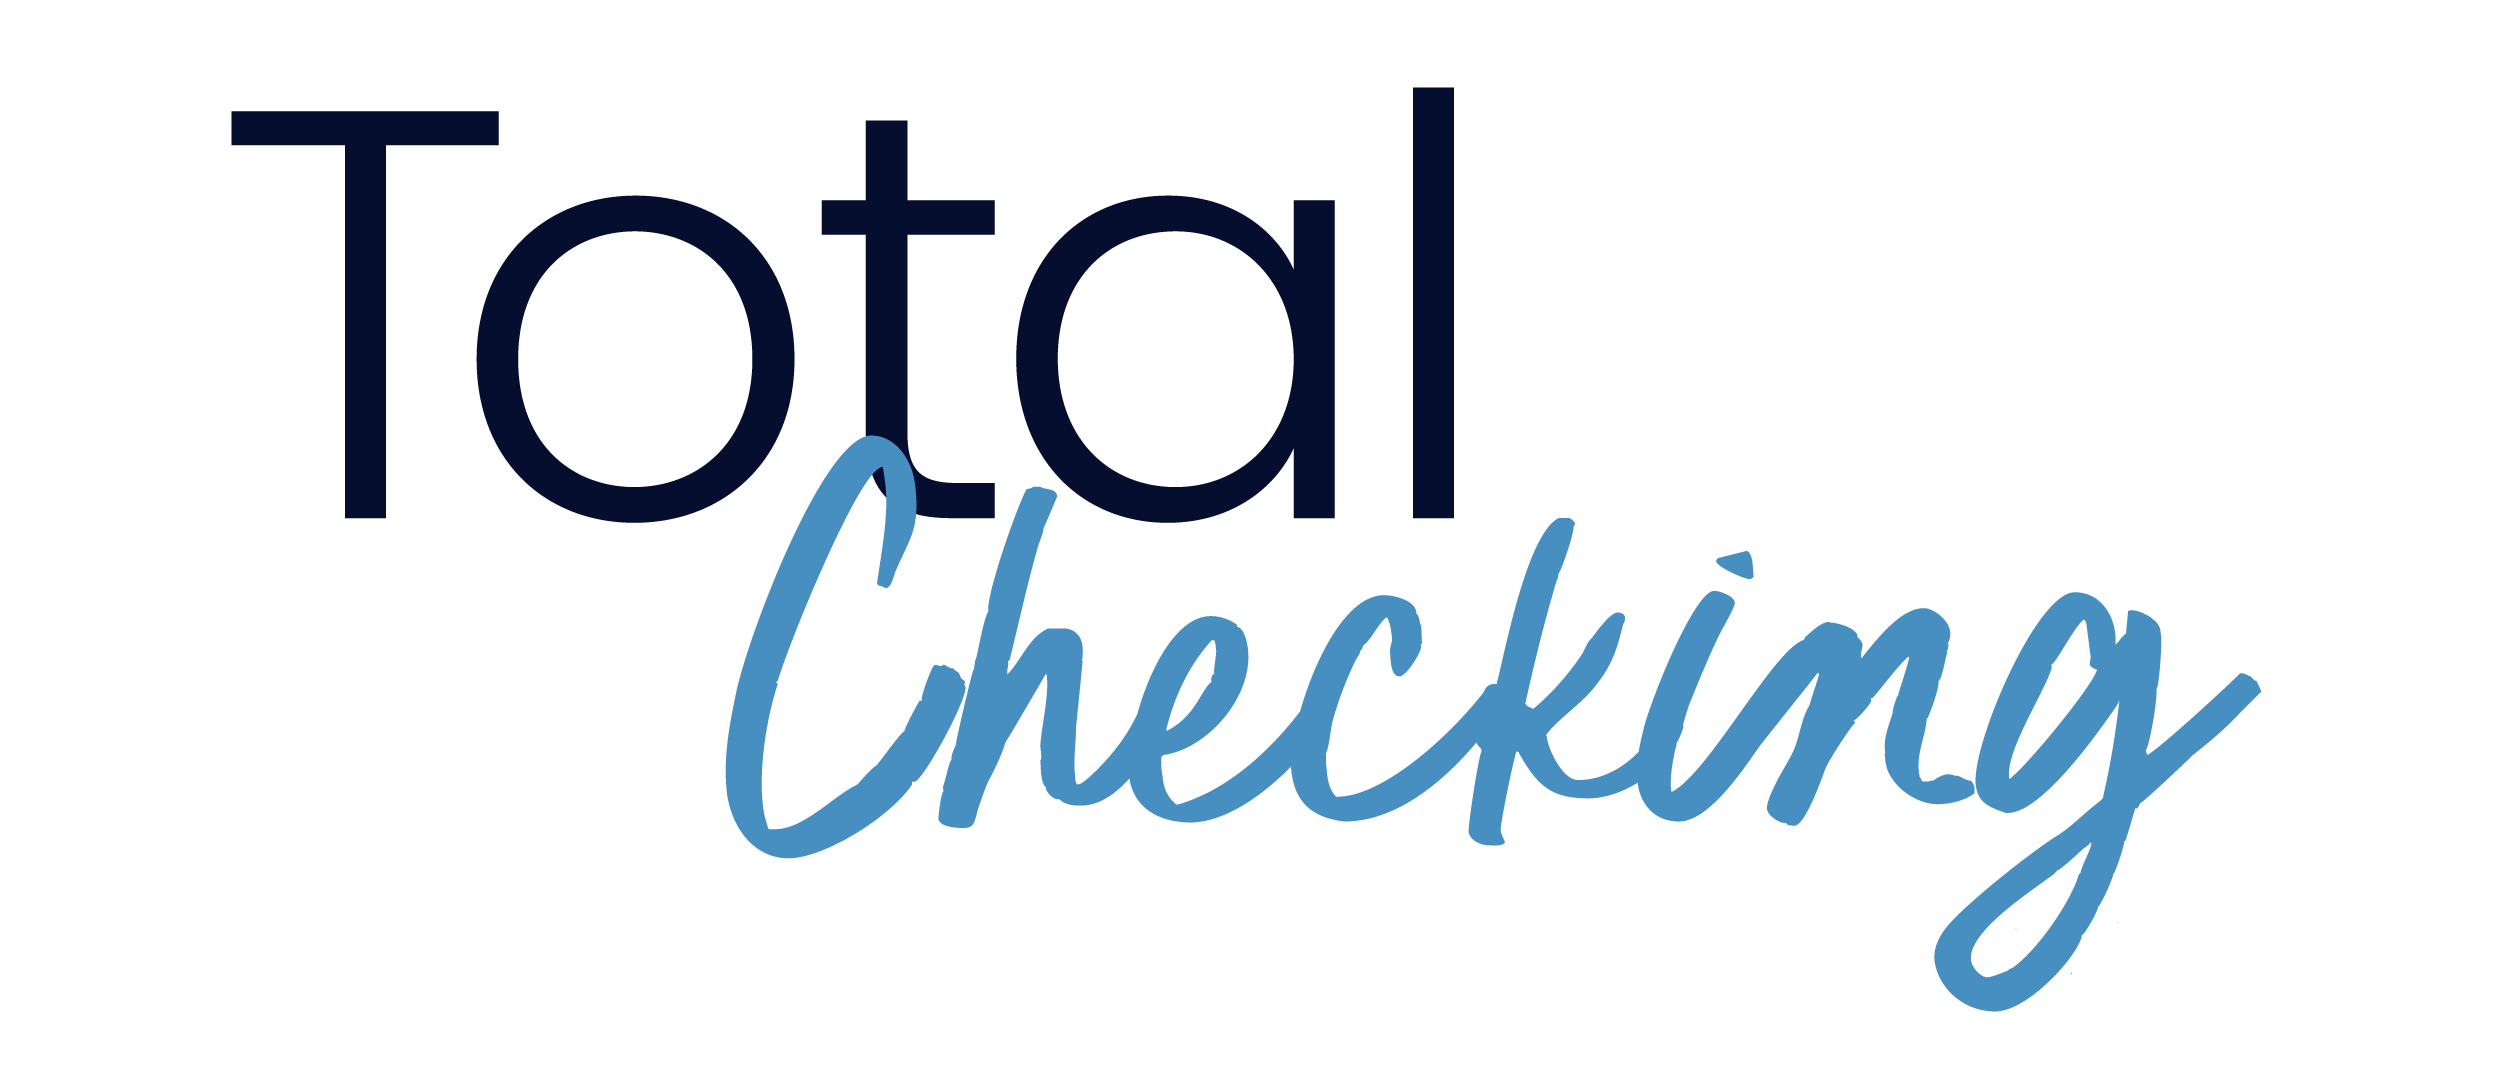 Total Checking